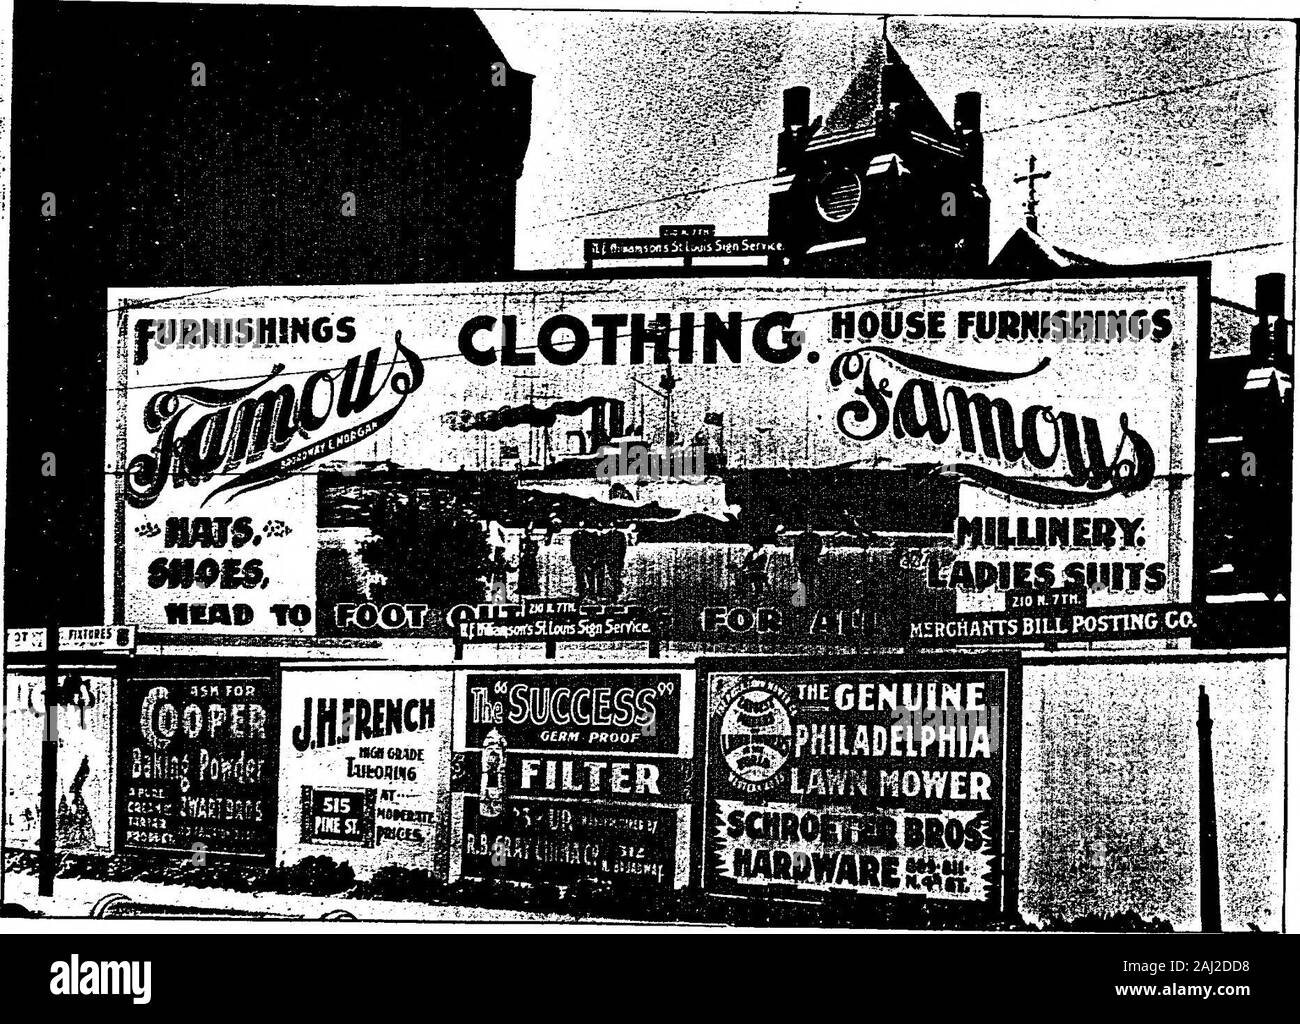 Billboard (Jul-Dec 1898) . In-dianapolis, and passed resolutions in favor ofevery »esociatlon within the State excludingfrom fairs all immoral shows. Fair associa-tions ought to be able to do this without lireaid of resolutions. Washington, Ind., will have a street fairthis year. Seymour will have another street fair thisyear. Jeffersonvllle. Ind., will bold a street fair. No fair will be held at Kokomo, Ind.. thisfall. Americans and American exhibits will beconspicuous by their absence at the ParisExposition in 1900. The next meeting of the American Associa-tion of Fairs and Expositions will Stock Photo